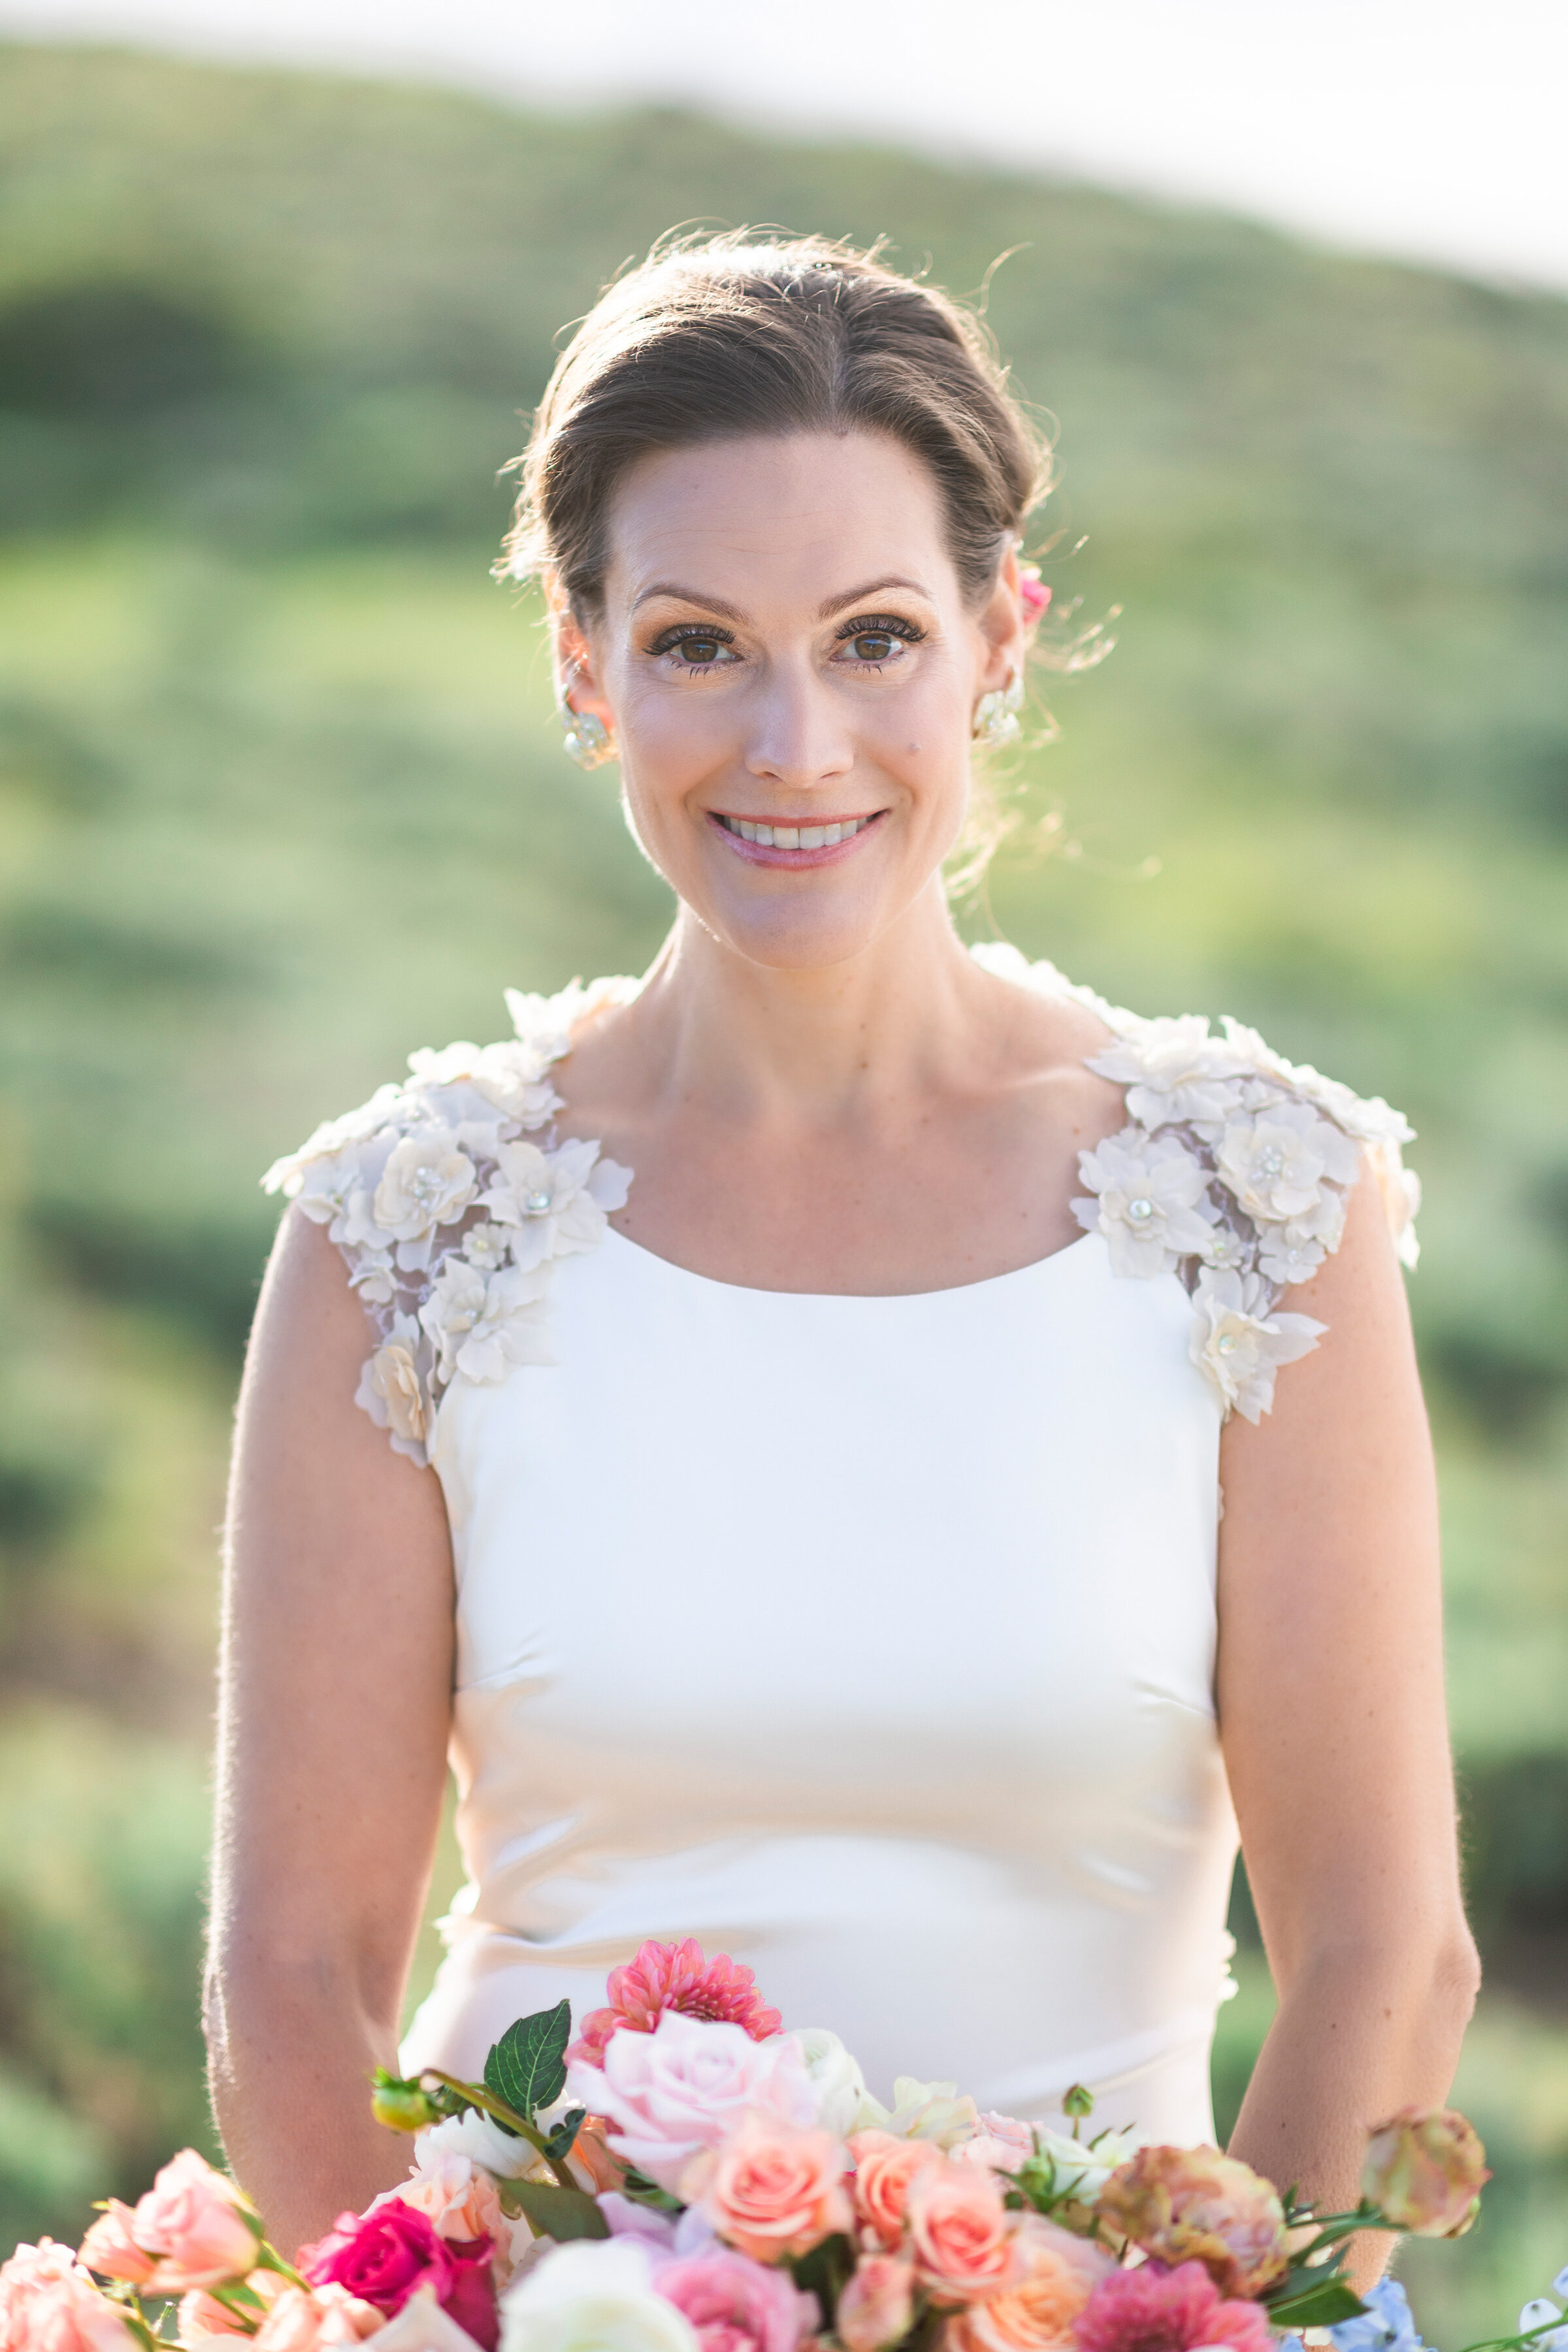  wedding bridals located in the  lush green utah mountains, featuring a blurred background and floral accented bridal dress by clarity lane photography. diamond wedding earrings bridal portraits focused bridal photography green utah mountains best pr